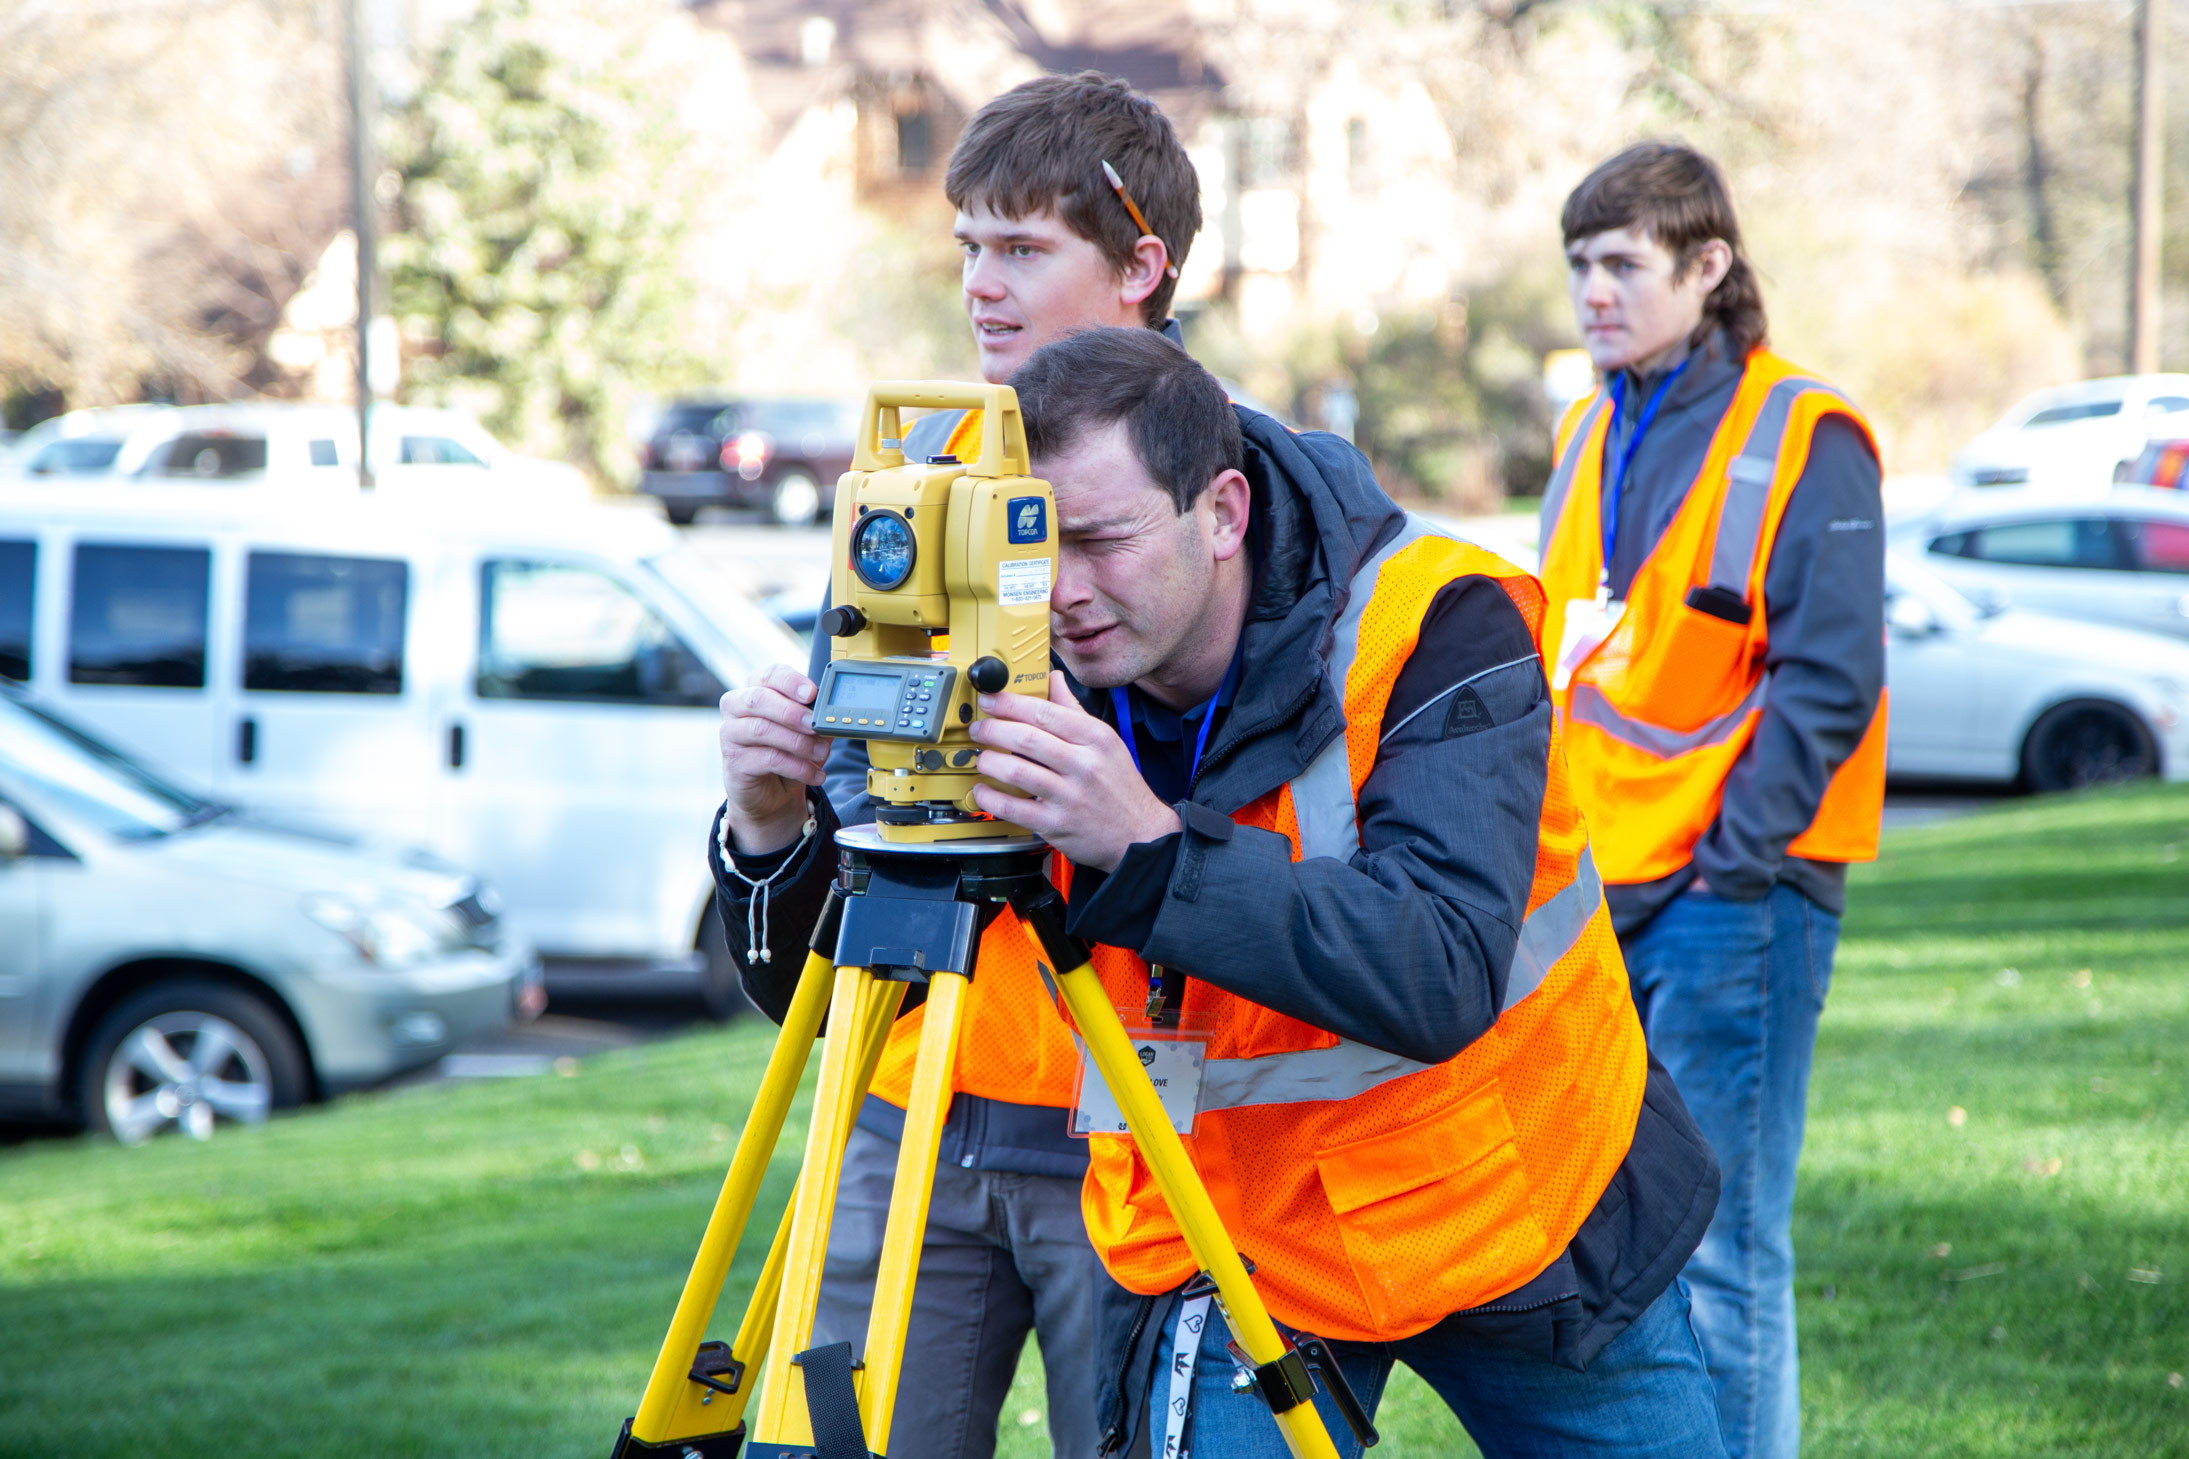 The surveying competition requires students to use standard field equipment and procedures to solve common problems encountered in the industry.